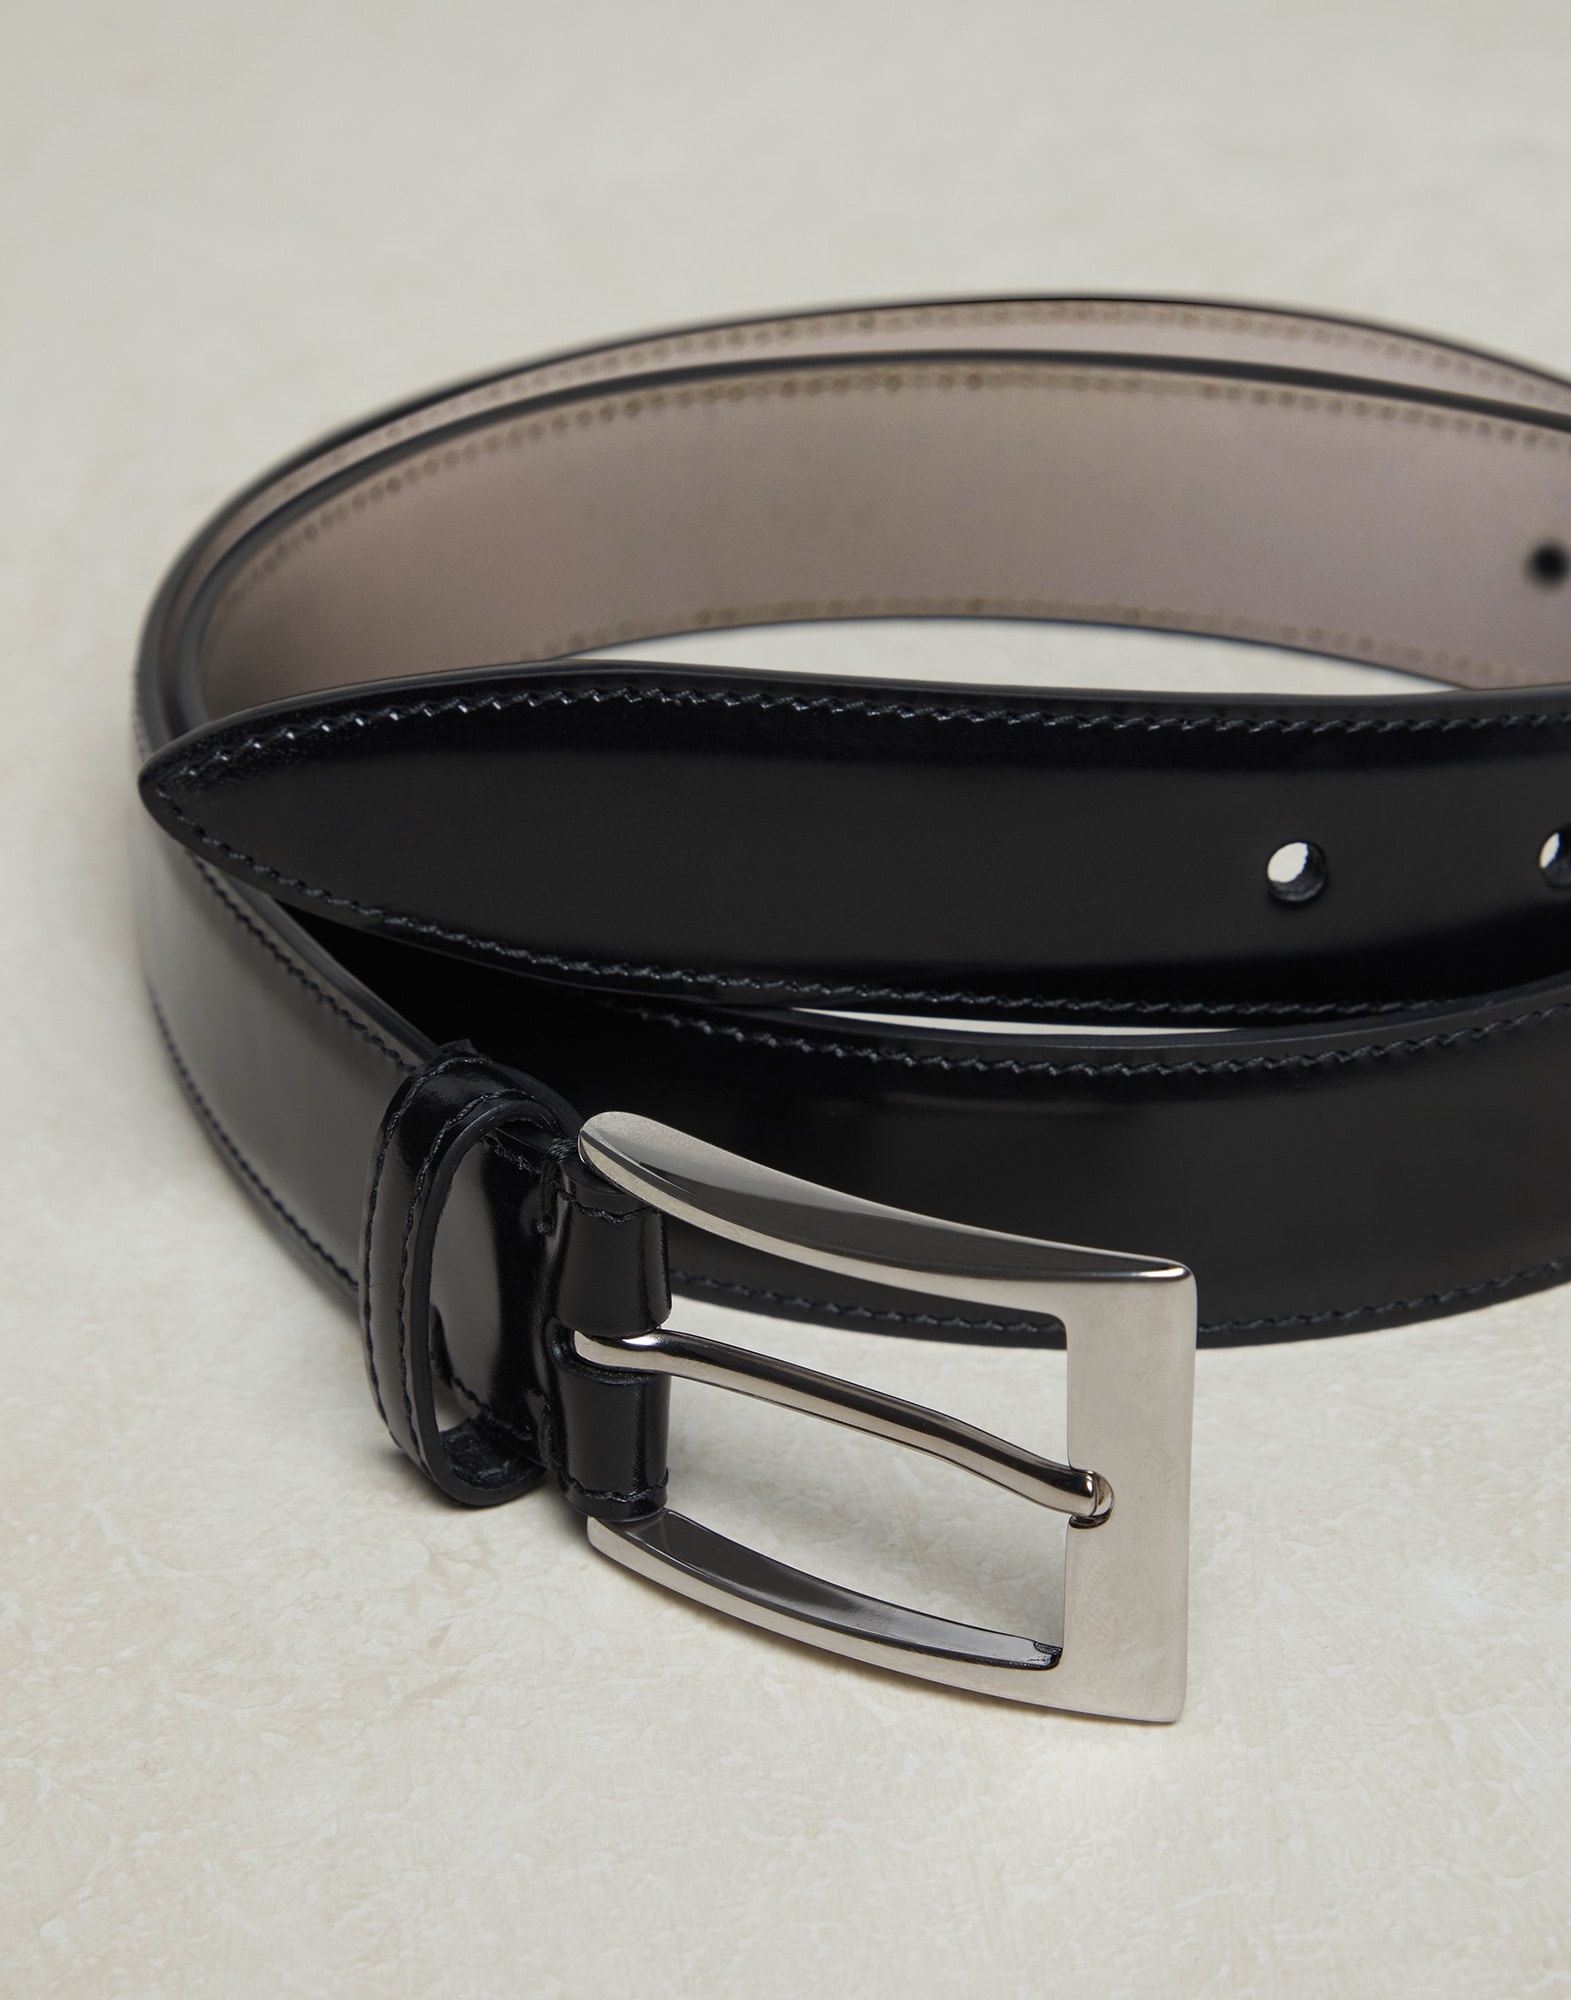 Formal calfskin belt with square buckle - 2